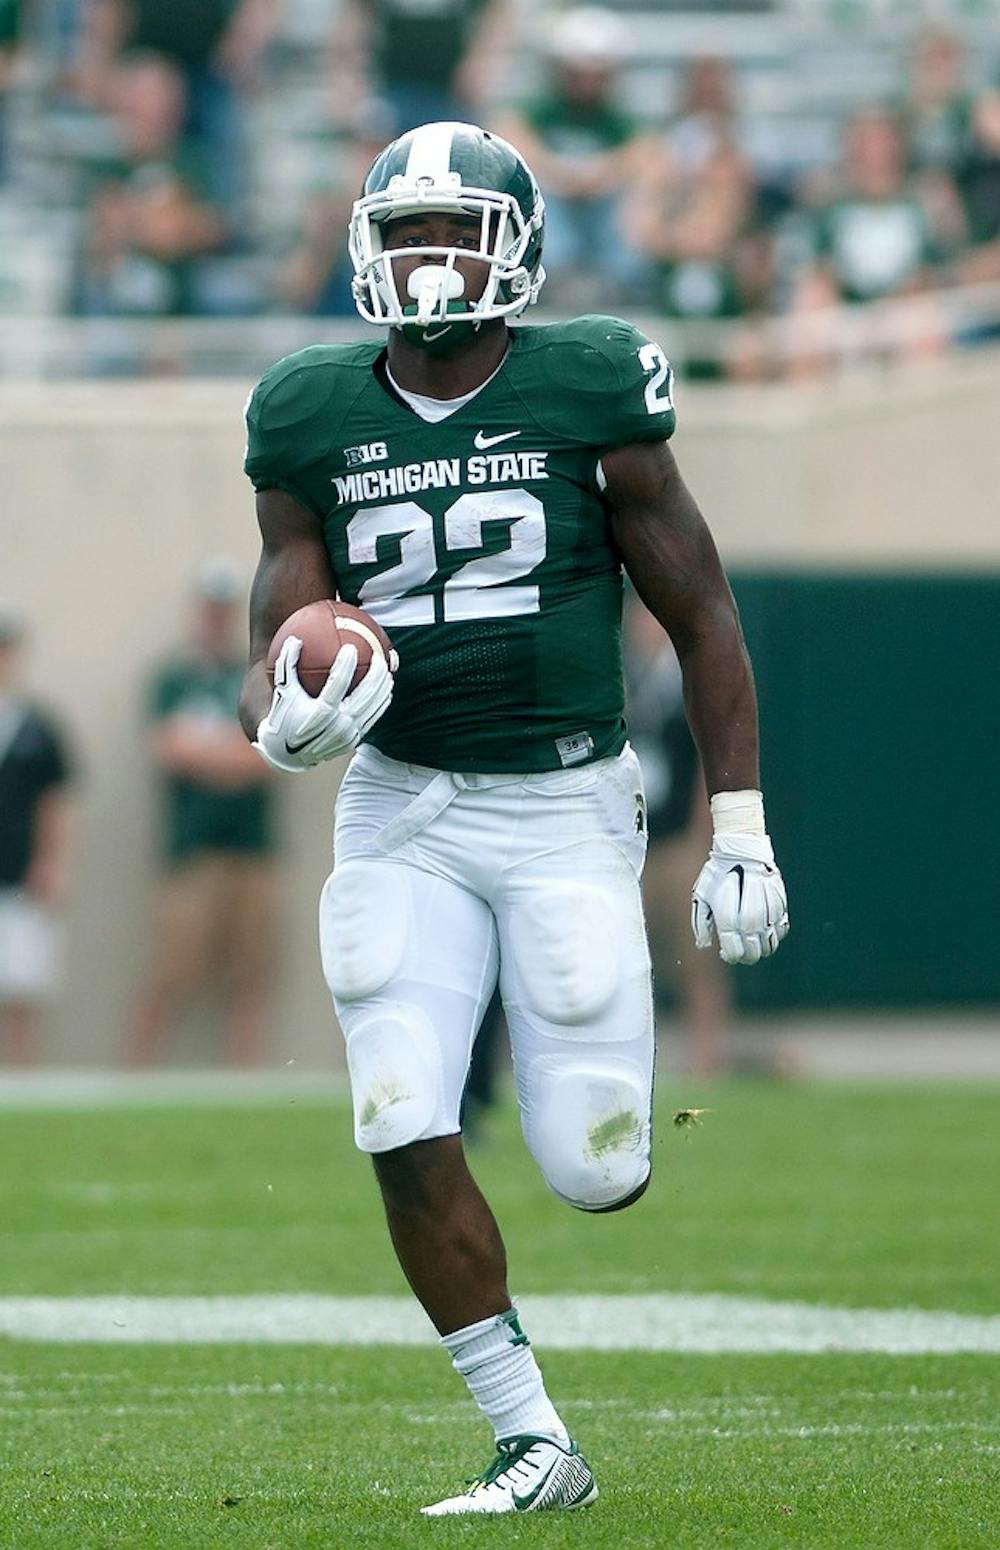 <p>Sophomore running back Delton Williams runs down field to score a touchdown during the game against Eastern Michigan on Sept. 20, 2014, at Spartan Stadium. The Spartans defeated the Eagles, 73-14. Jessalyn Tamez/The State News </p>